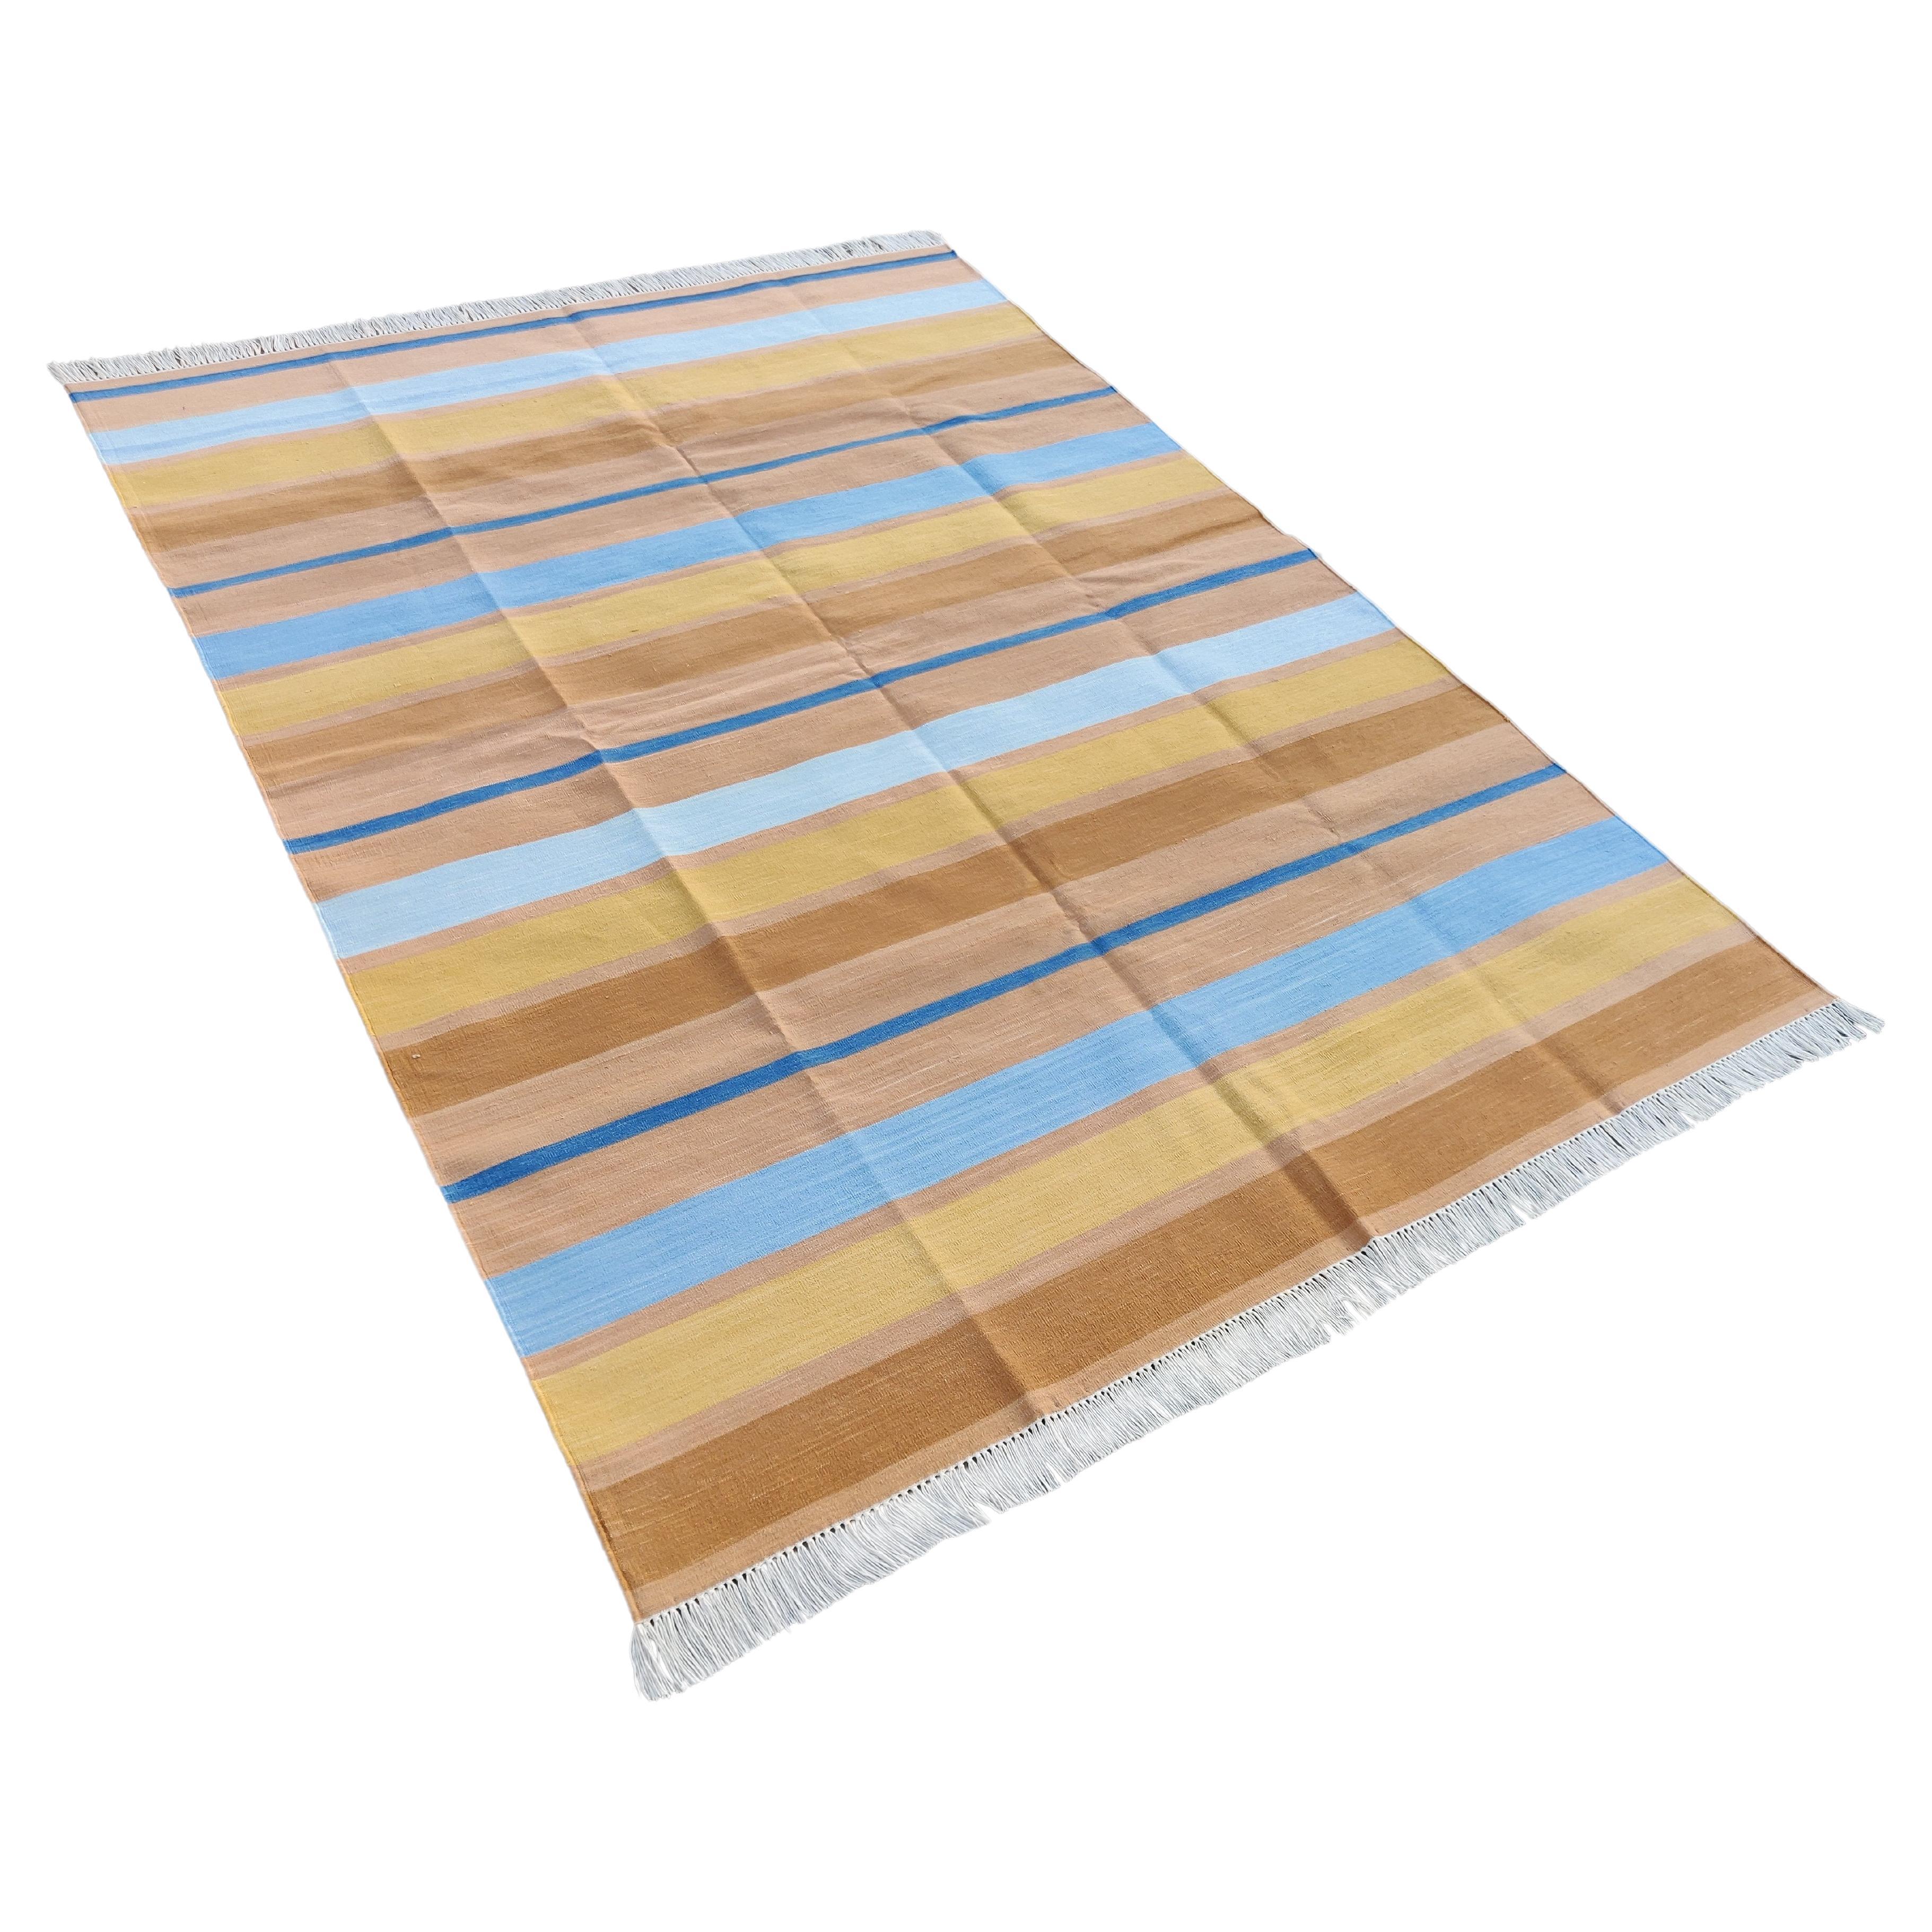 Handmade Cotton Area Flat Weave Rug, 5x7 Tan And Blue Striped Indian Dhurrie Rug For Sale